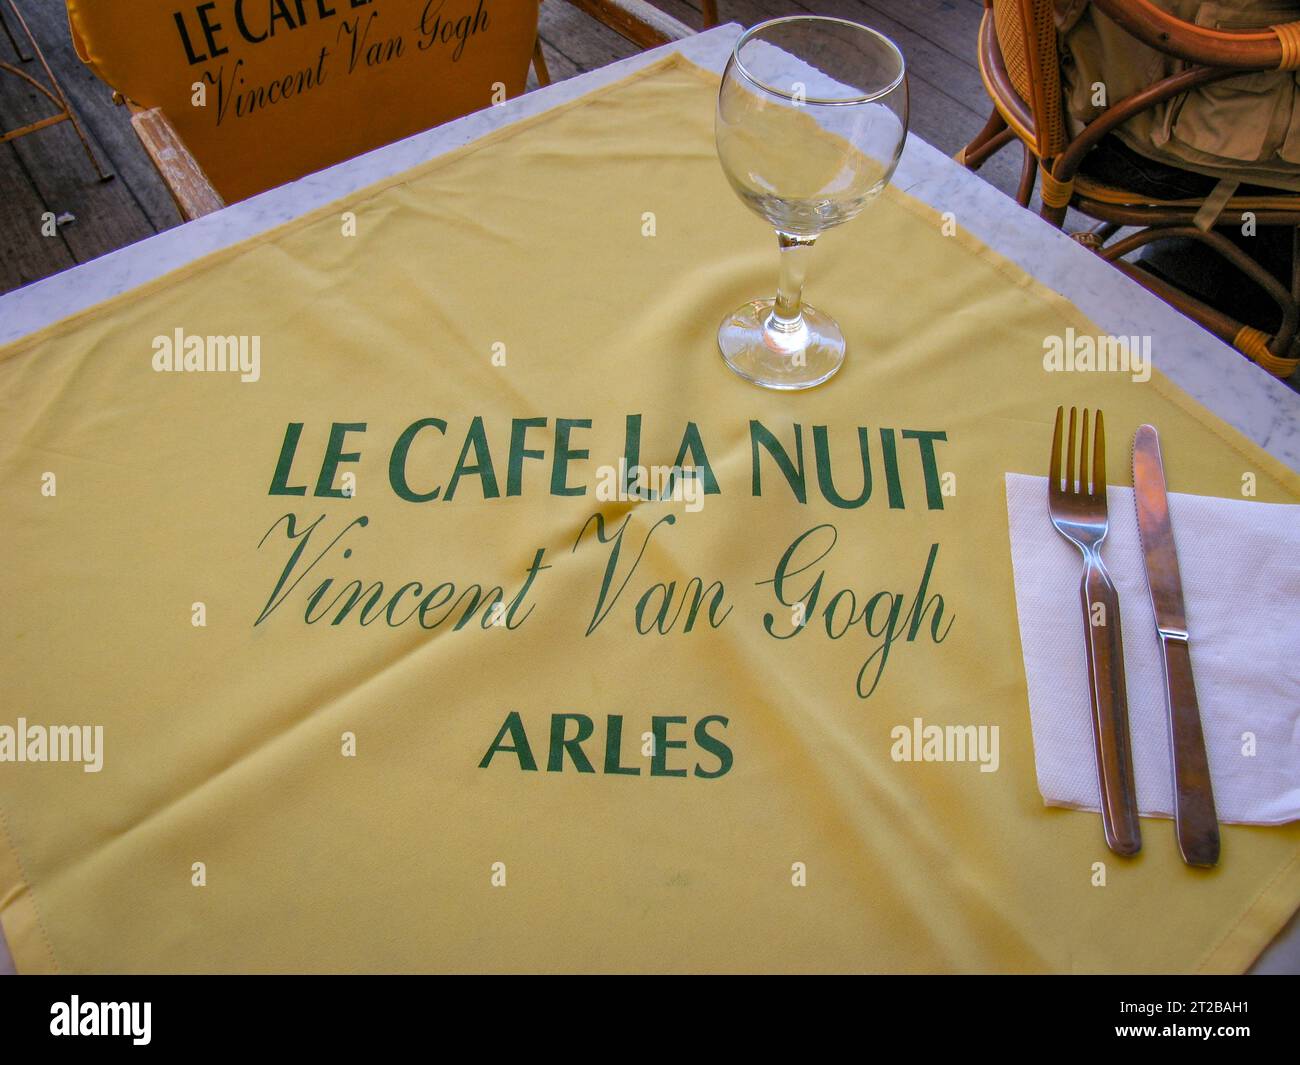 Le Cafe La Nuit is a famous cafe in Arles where Van Gogh often hung out during his time there. He also painted a painting of the cafe terrace at night Stock Photo